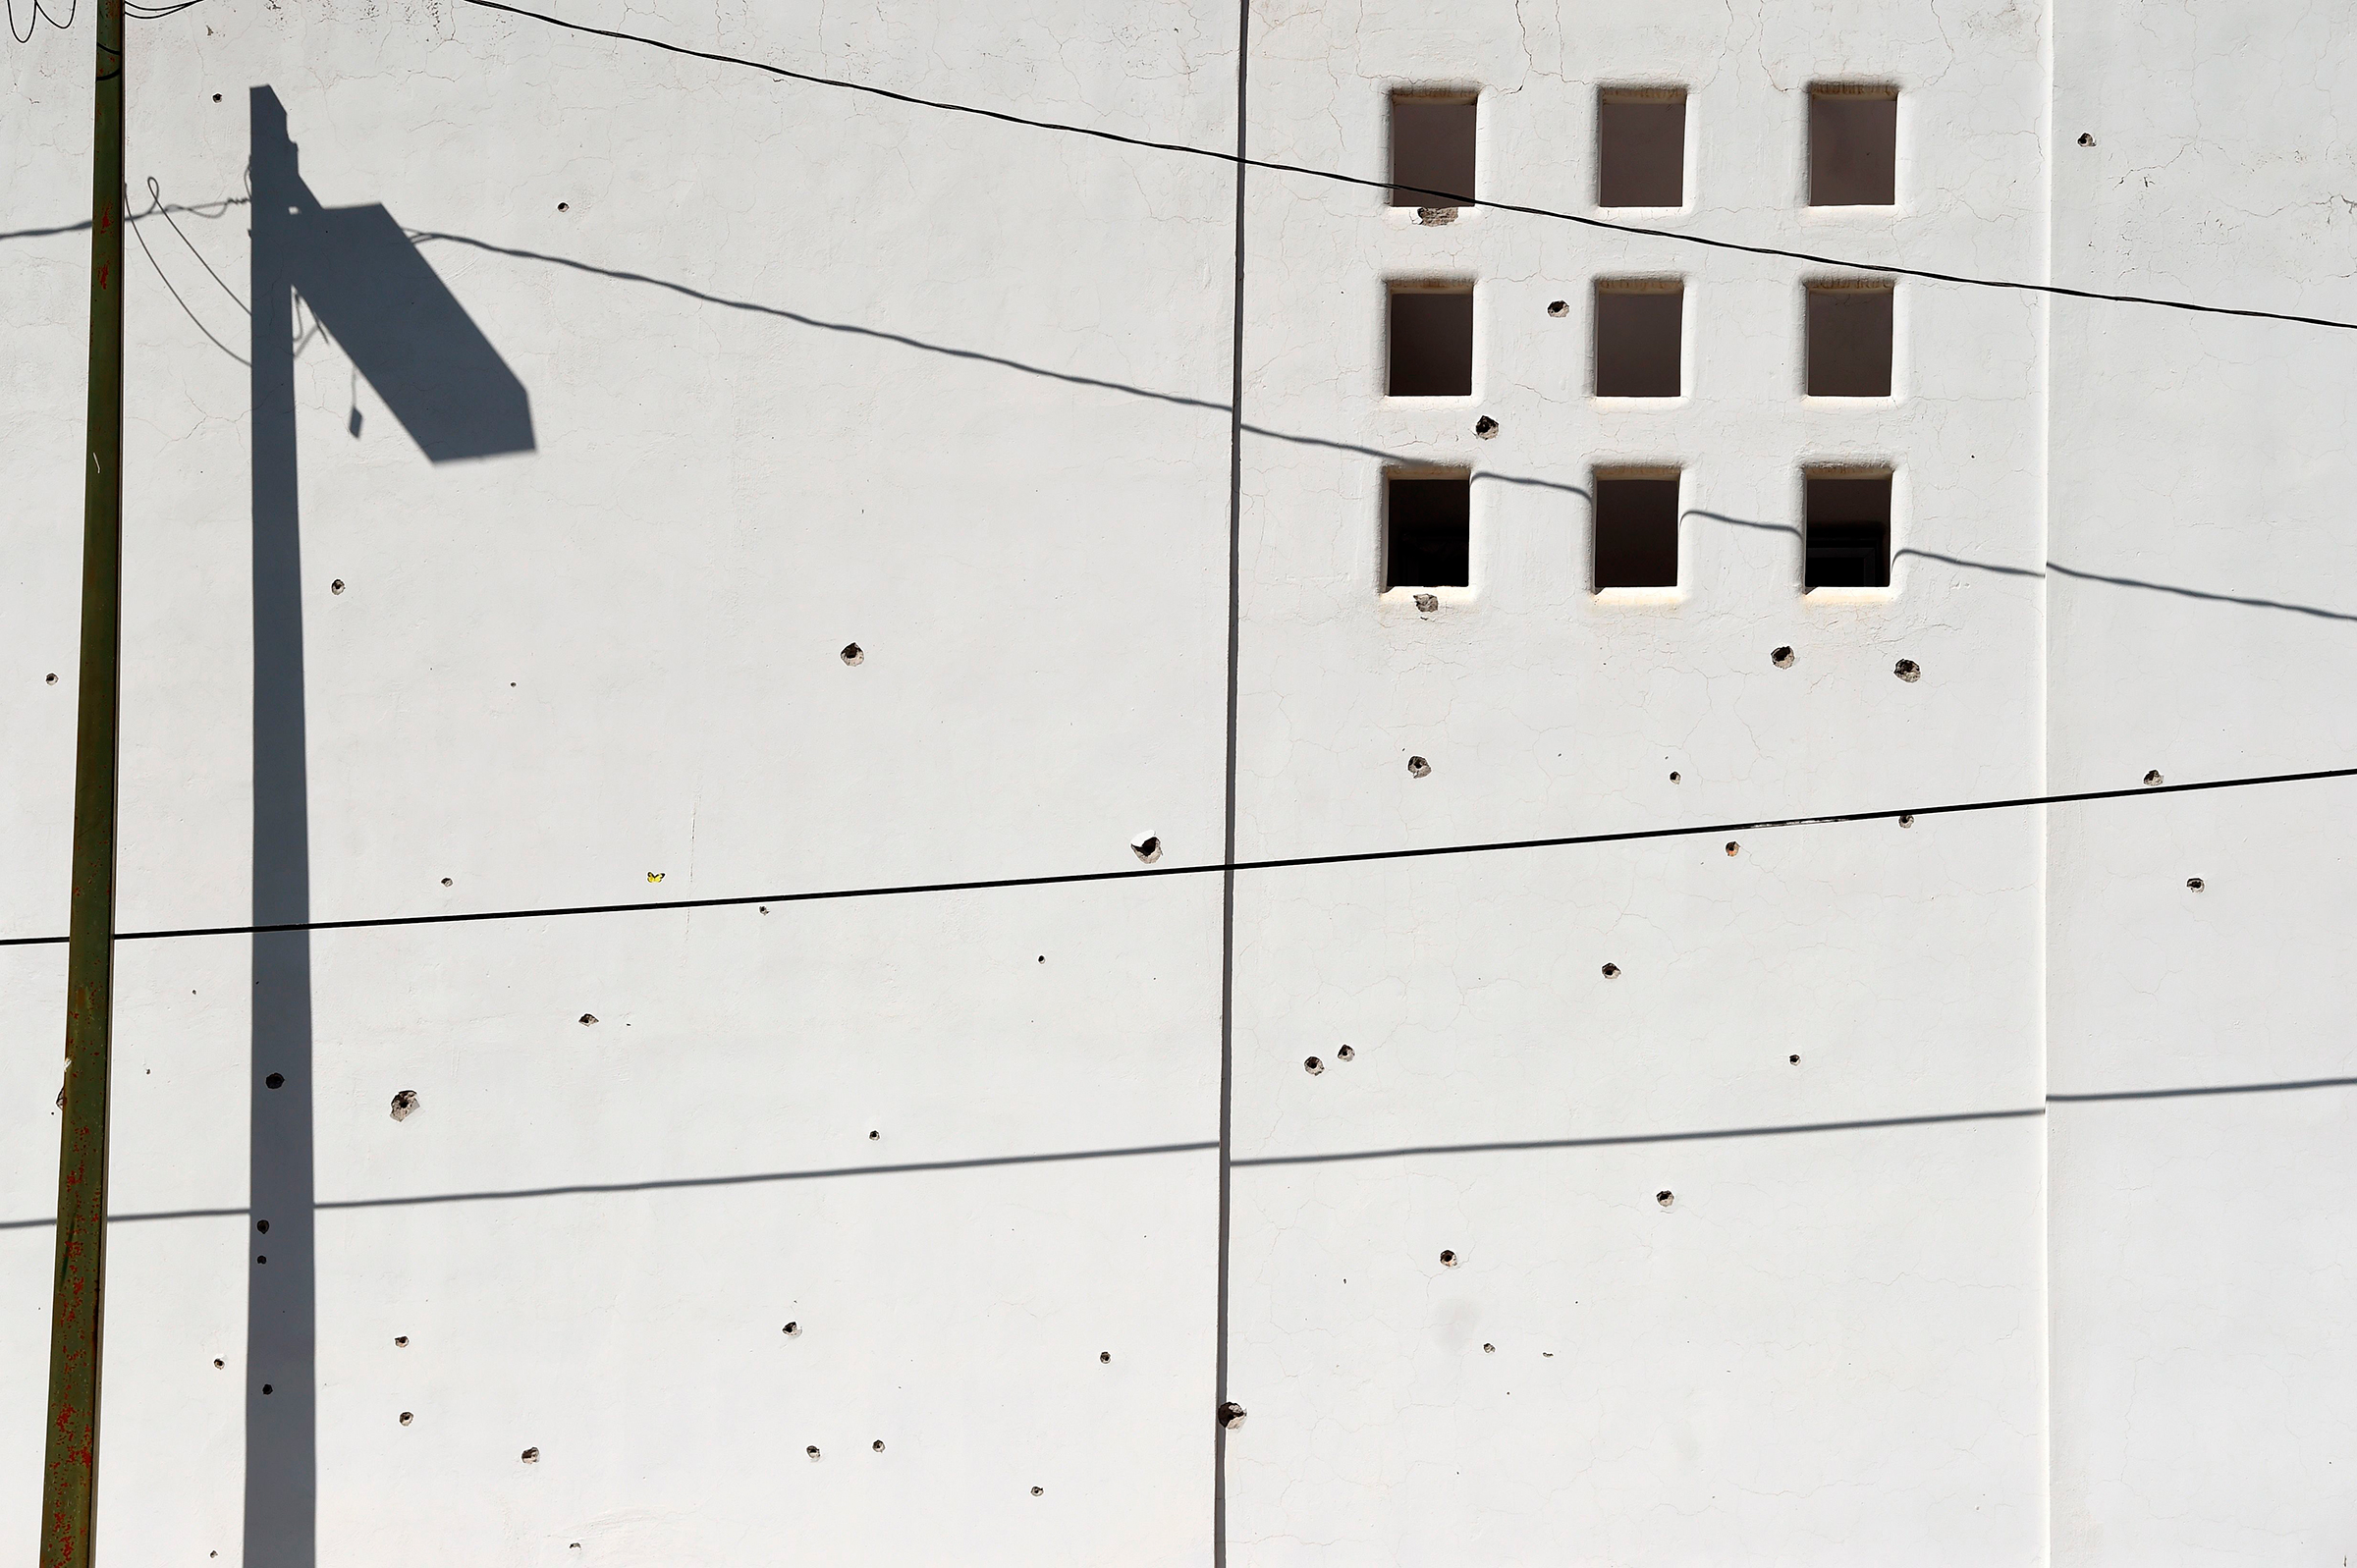 A wall is pockmarked with bullet holes in Culiacan, Mexico, on Oct. 18, 2019.